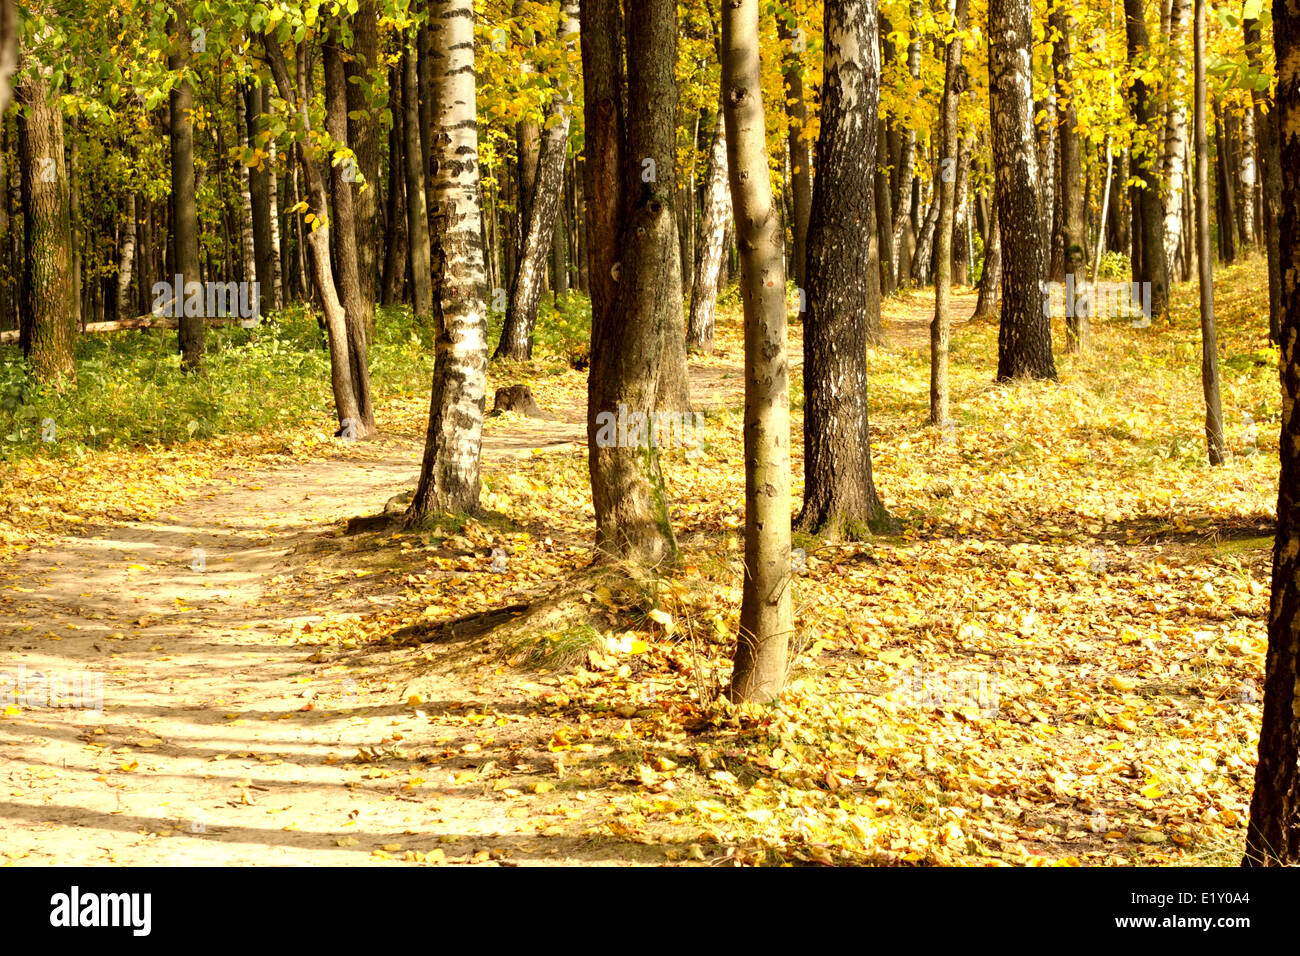 Curved path in autumn forest Stock Photo